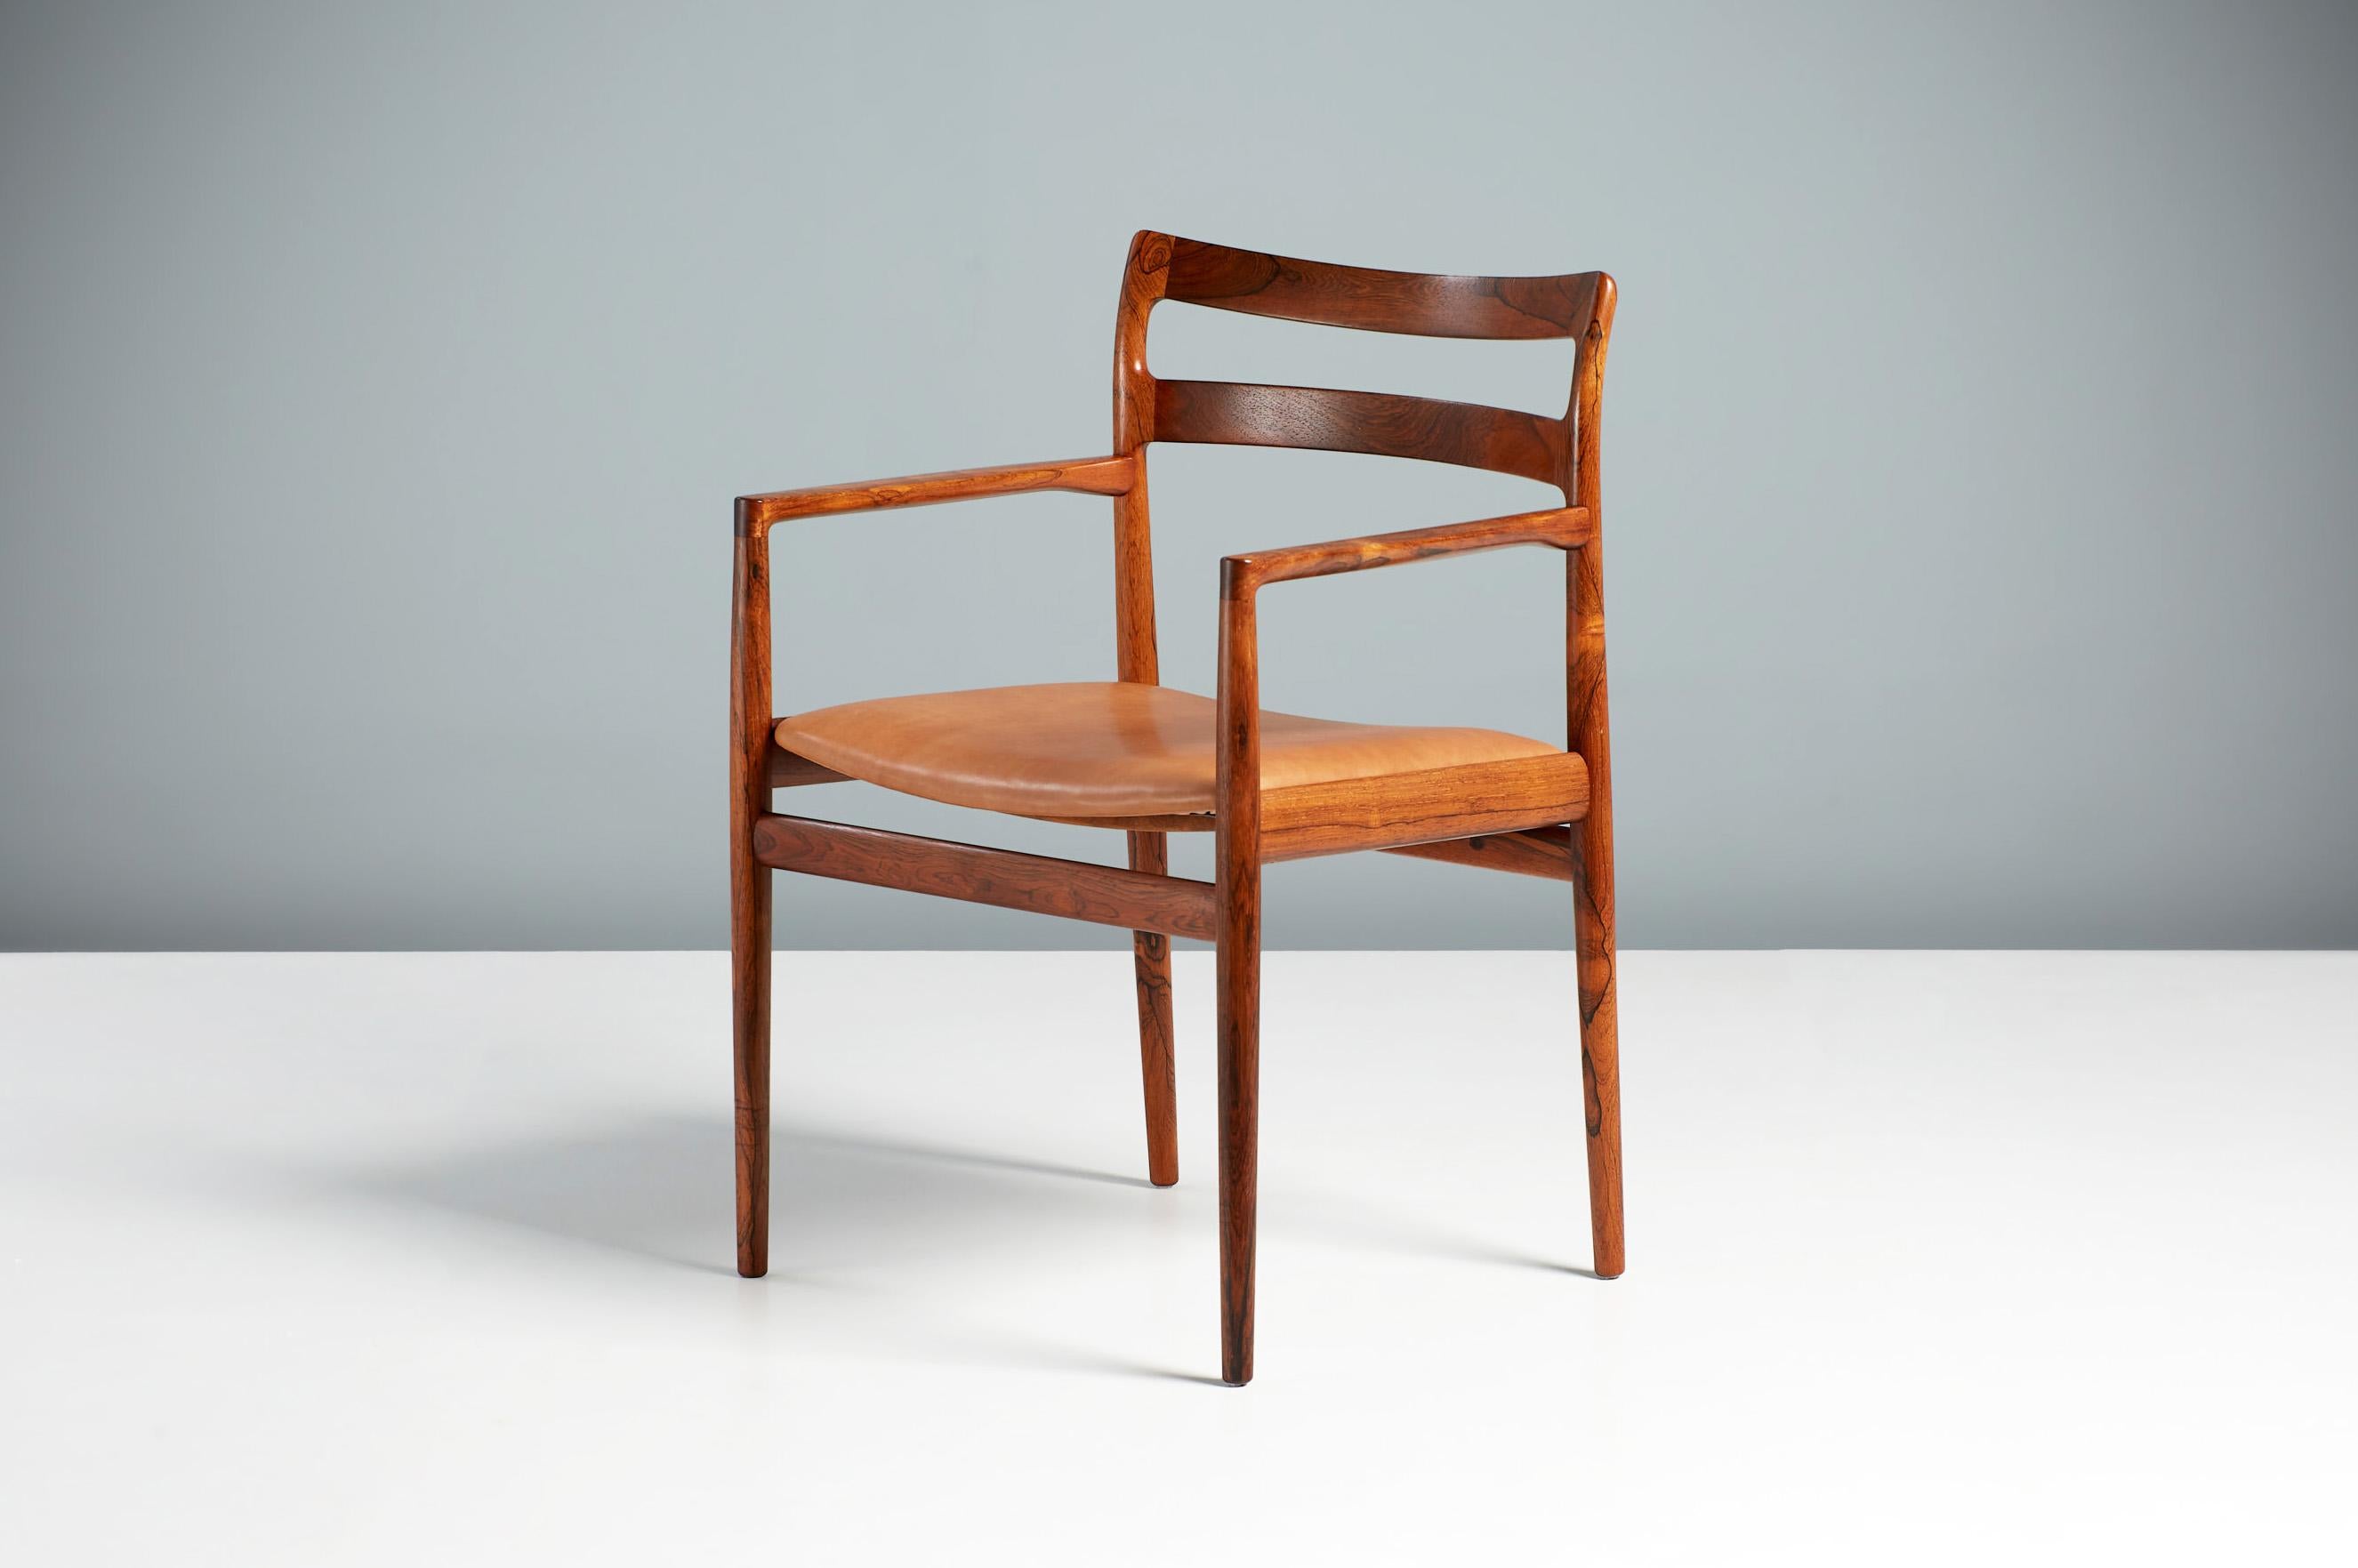 Johannes Norgaard armchair, circa 1960s

Rarely seen armchair from lesser-known Danish designer Johannes Norgaard. This piece is made from exquisite, highly figured rosewood. The seat has been reupholstered in tan brown aniline leather with new